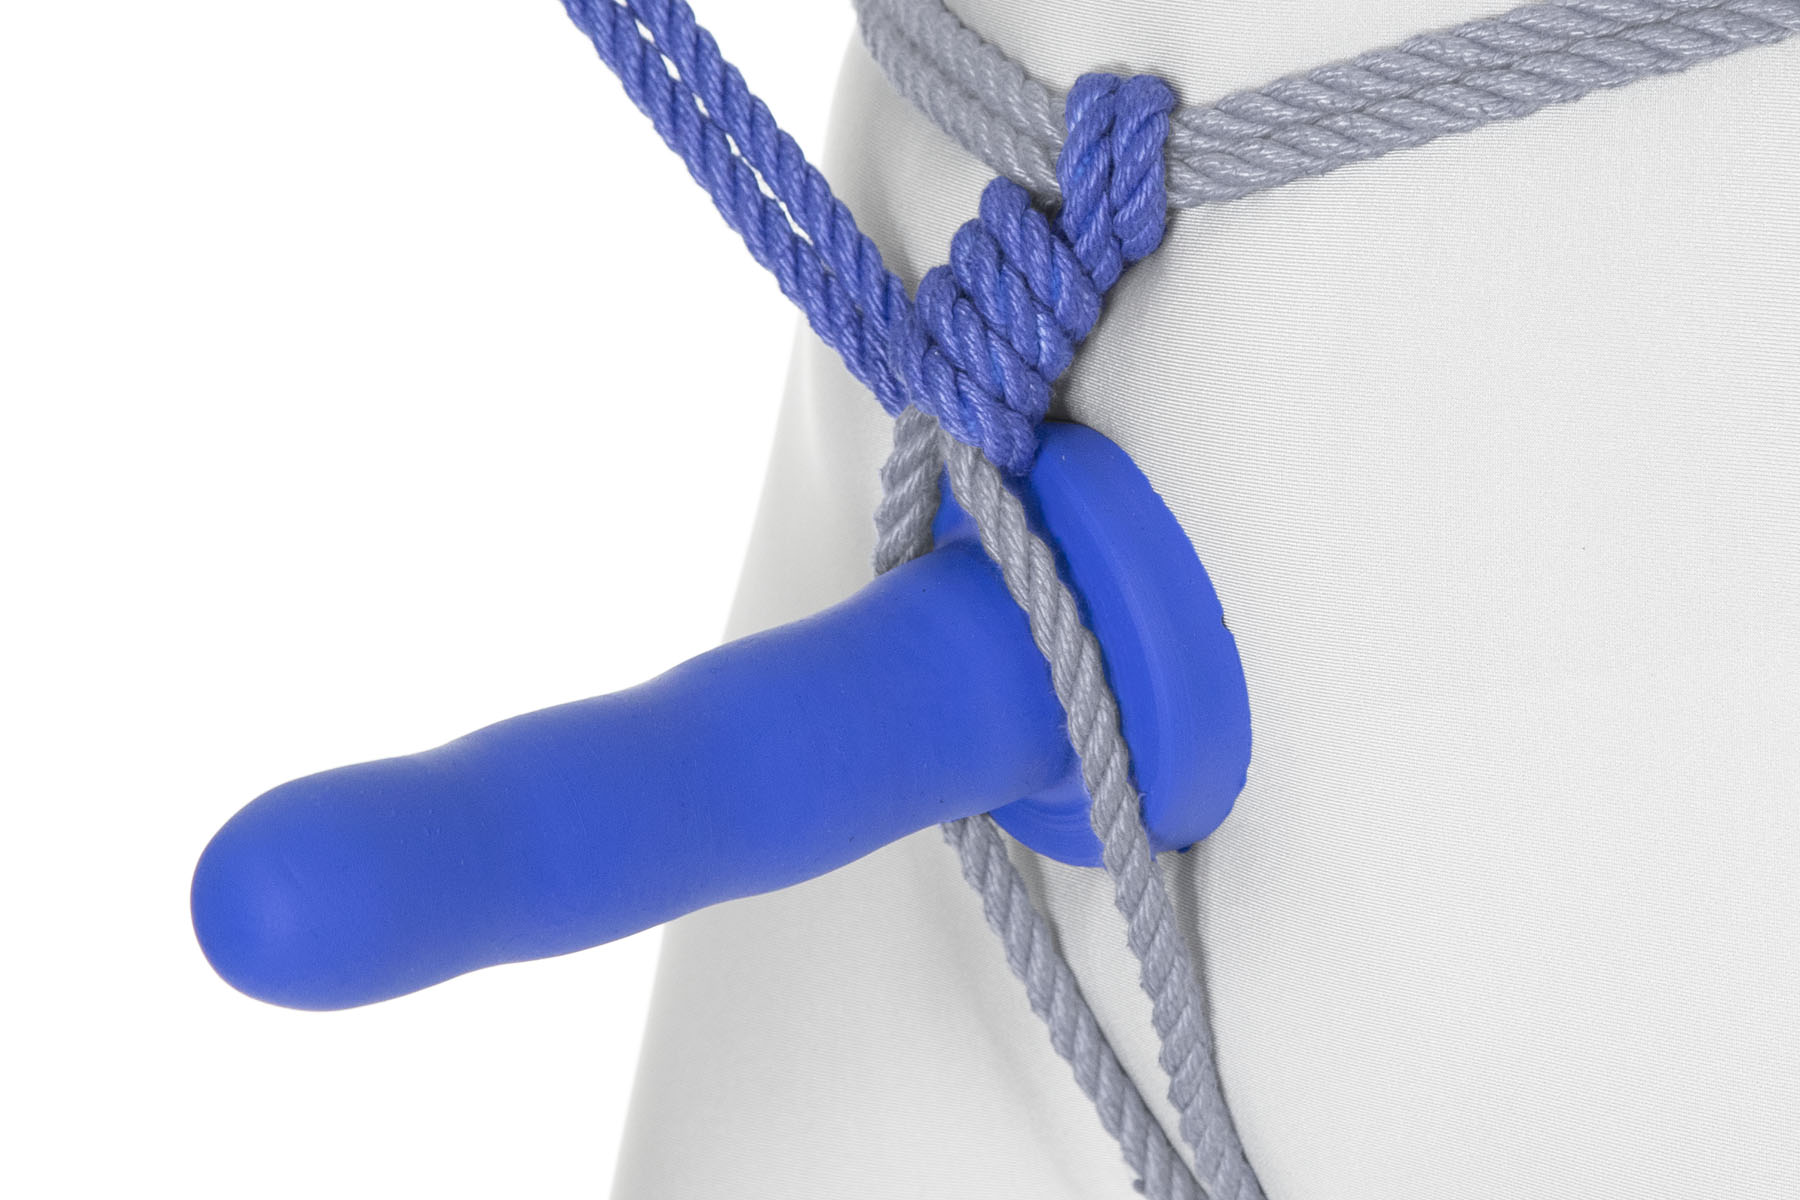 The rope comes back over the waist line and makes three tight spirals around itself, moving down. A blue dildo has been inserted between the two strands of the rope and pulled up snug against the spirals. The base of the dildo is against the pubic mound and it sticks straight out.